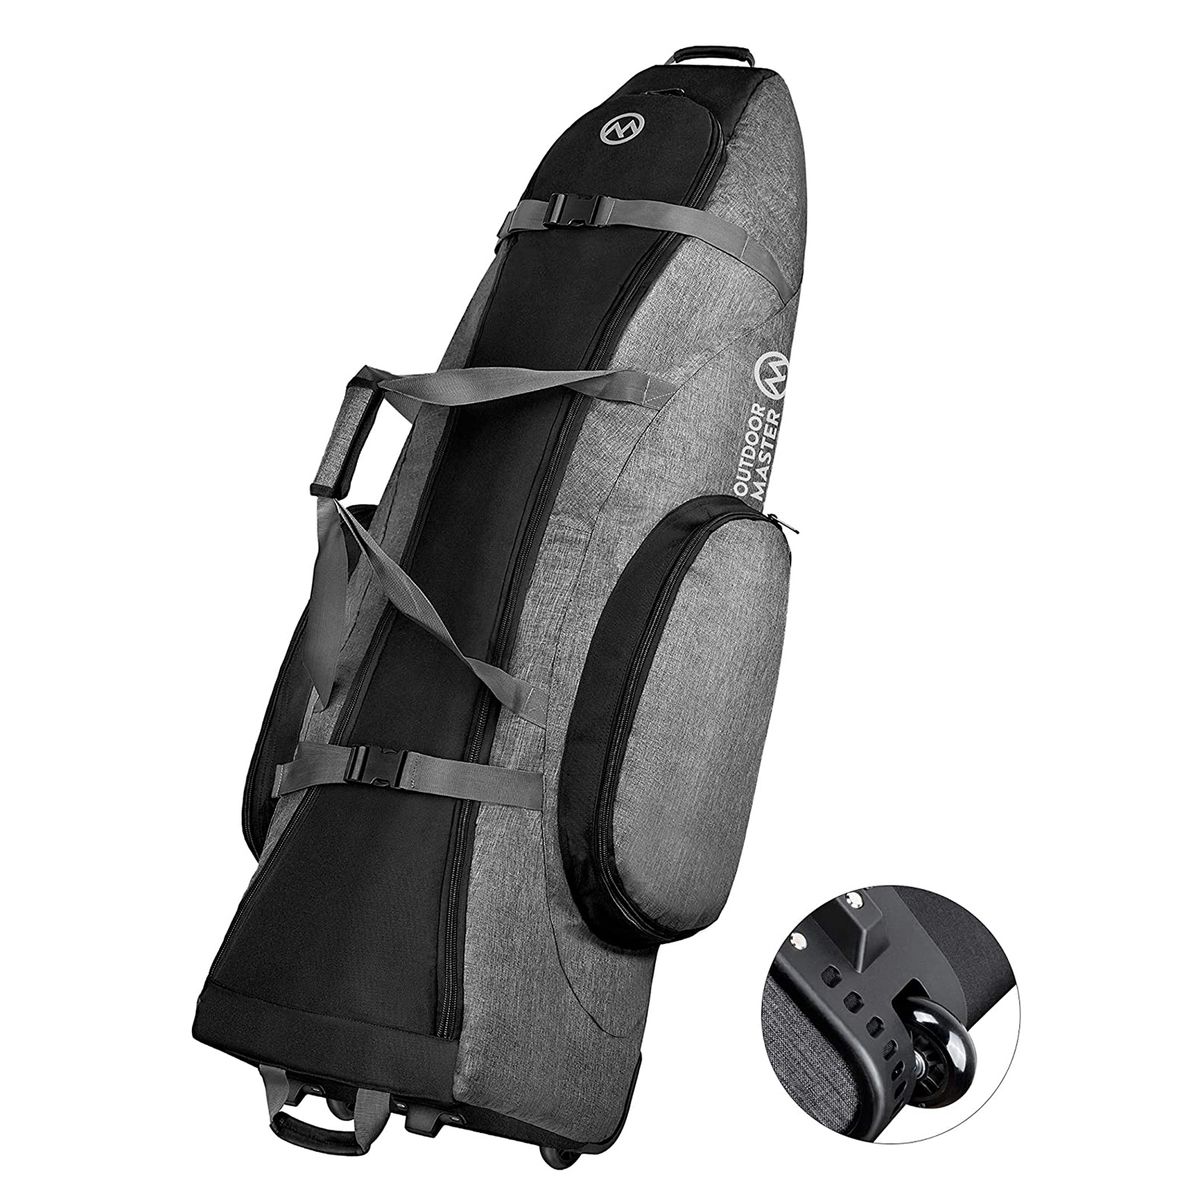 OutdoorMaster Padded Golf Club Travel Bag in Grey